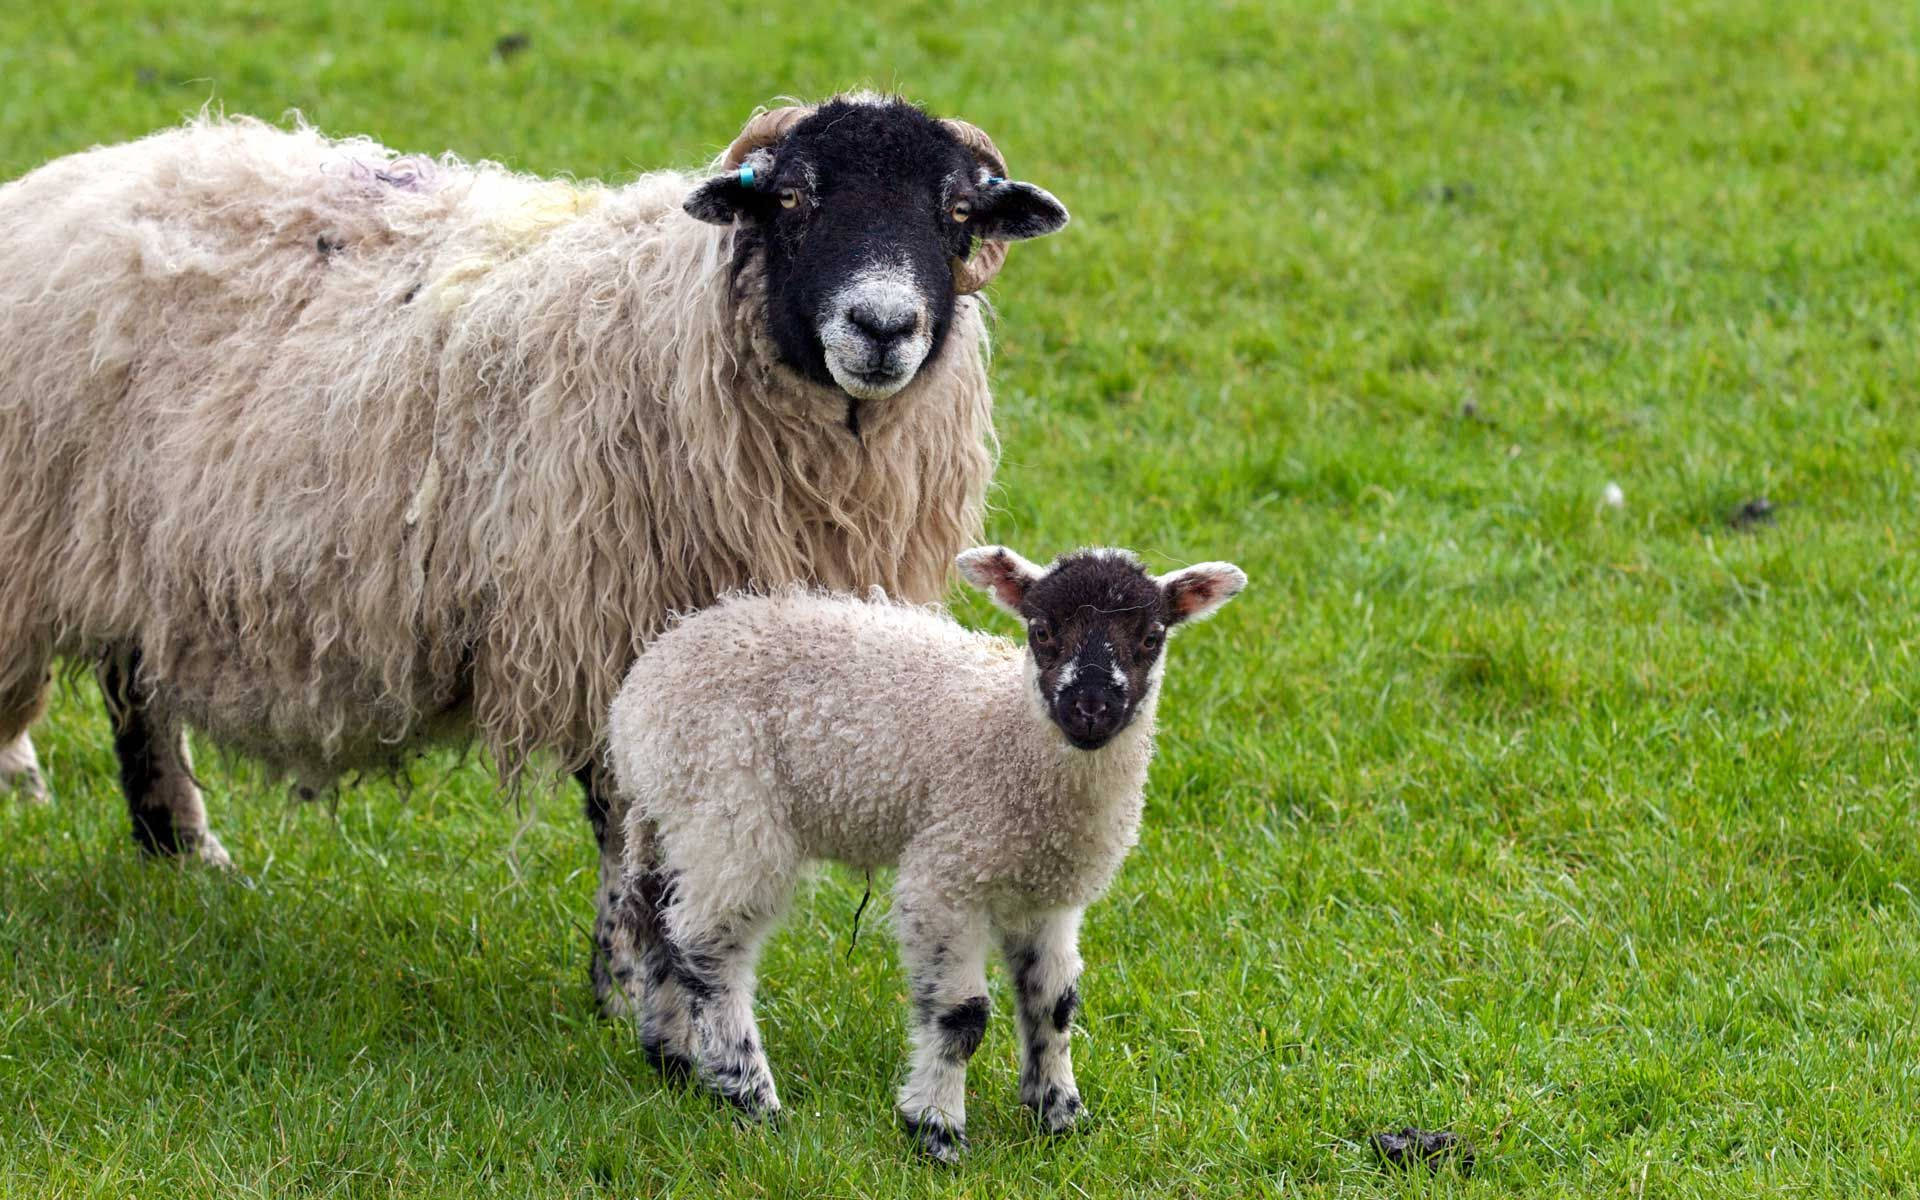 Lamb Black And White With Mother On Grass Wallpaper